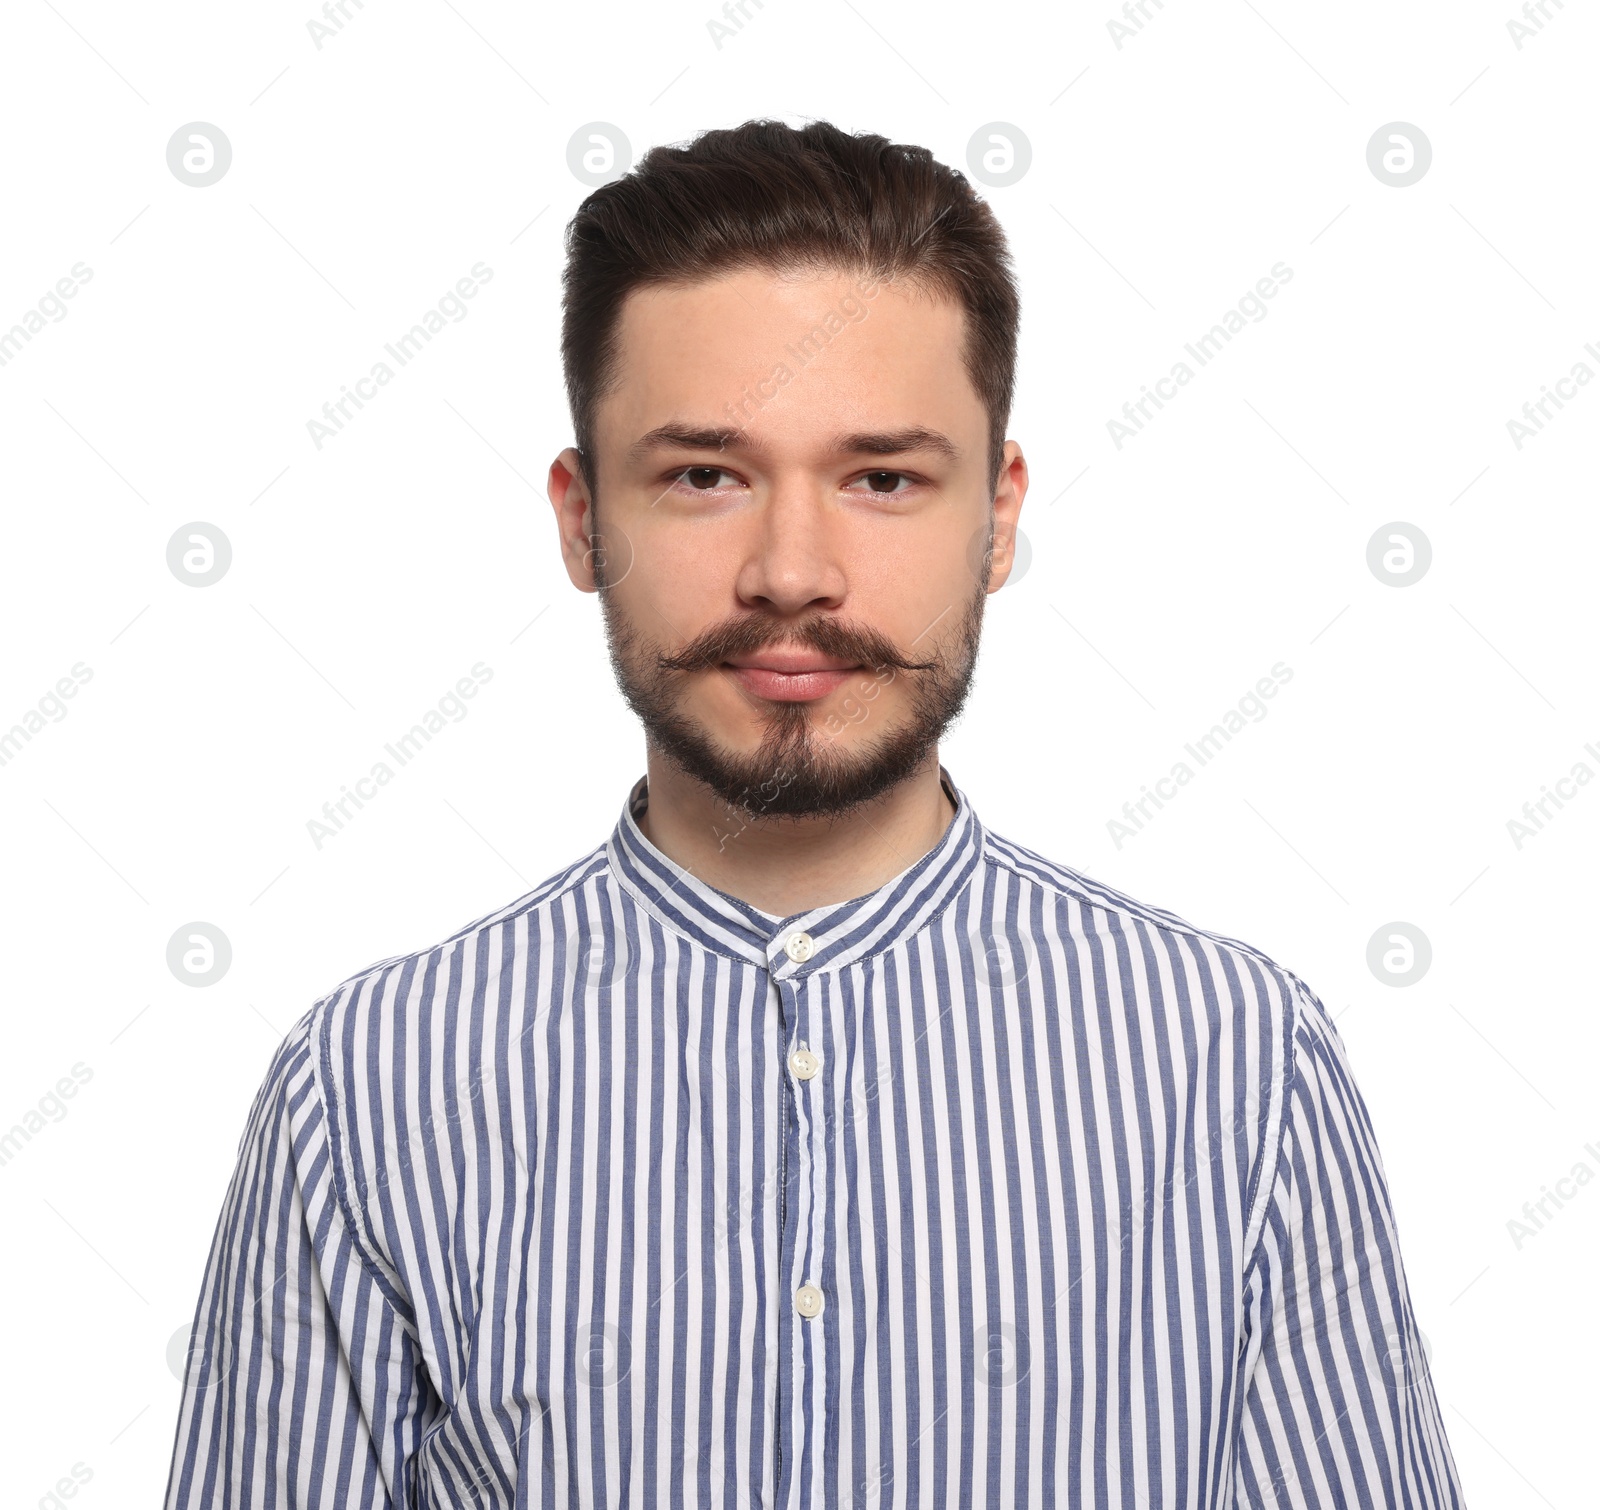 Photo of Handsome man in striped shirt on white background